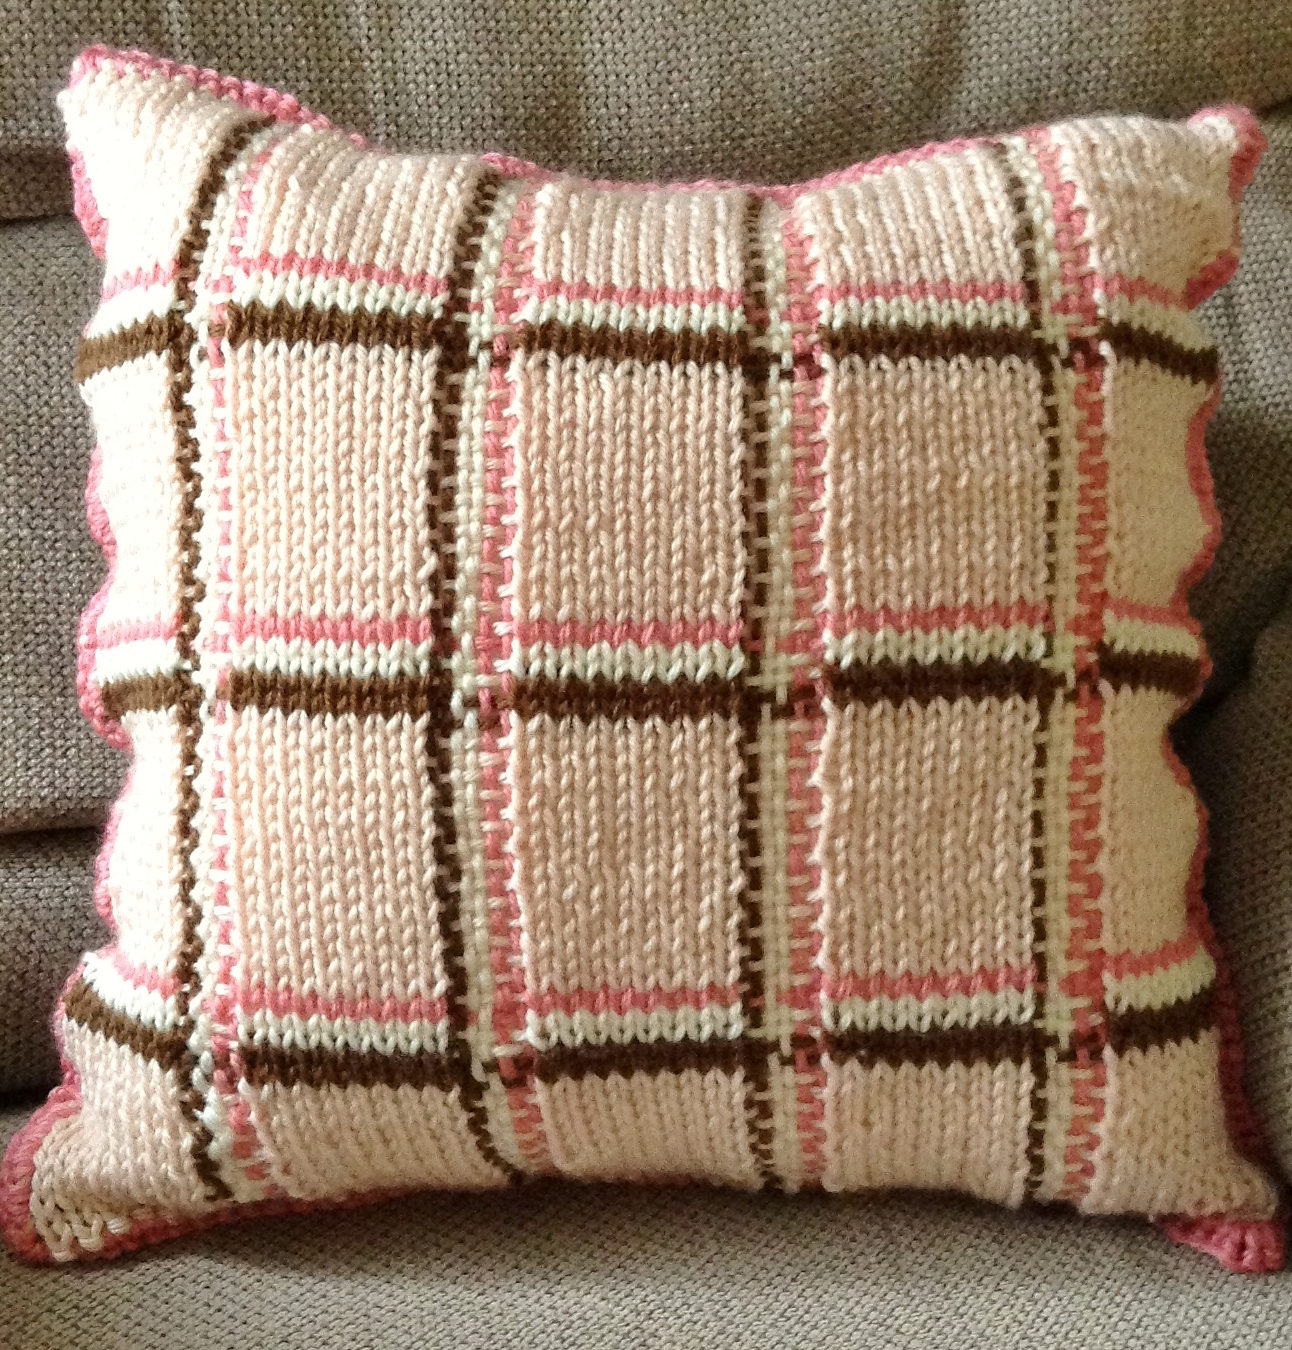 Free Cushion Cover Knitting Pattern Plaid Knitting Patterns In The Loop Knitting